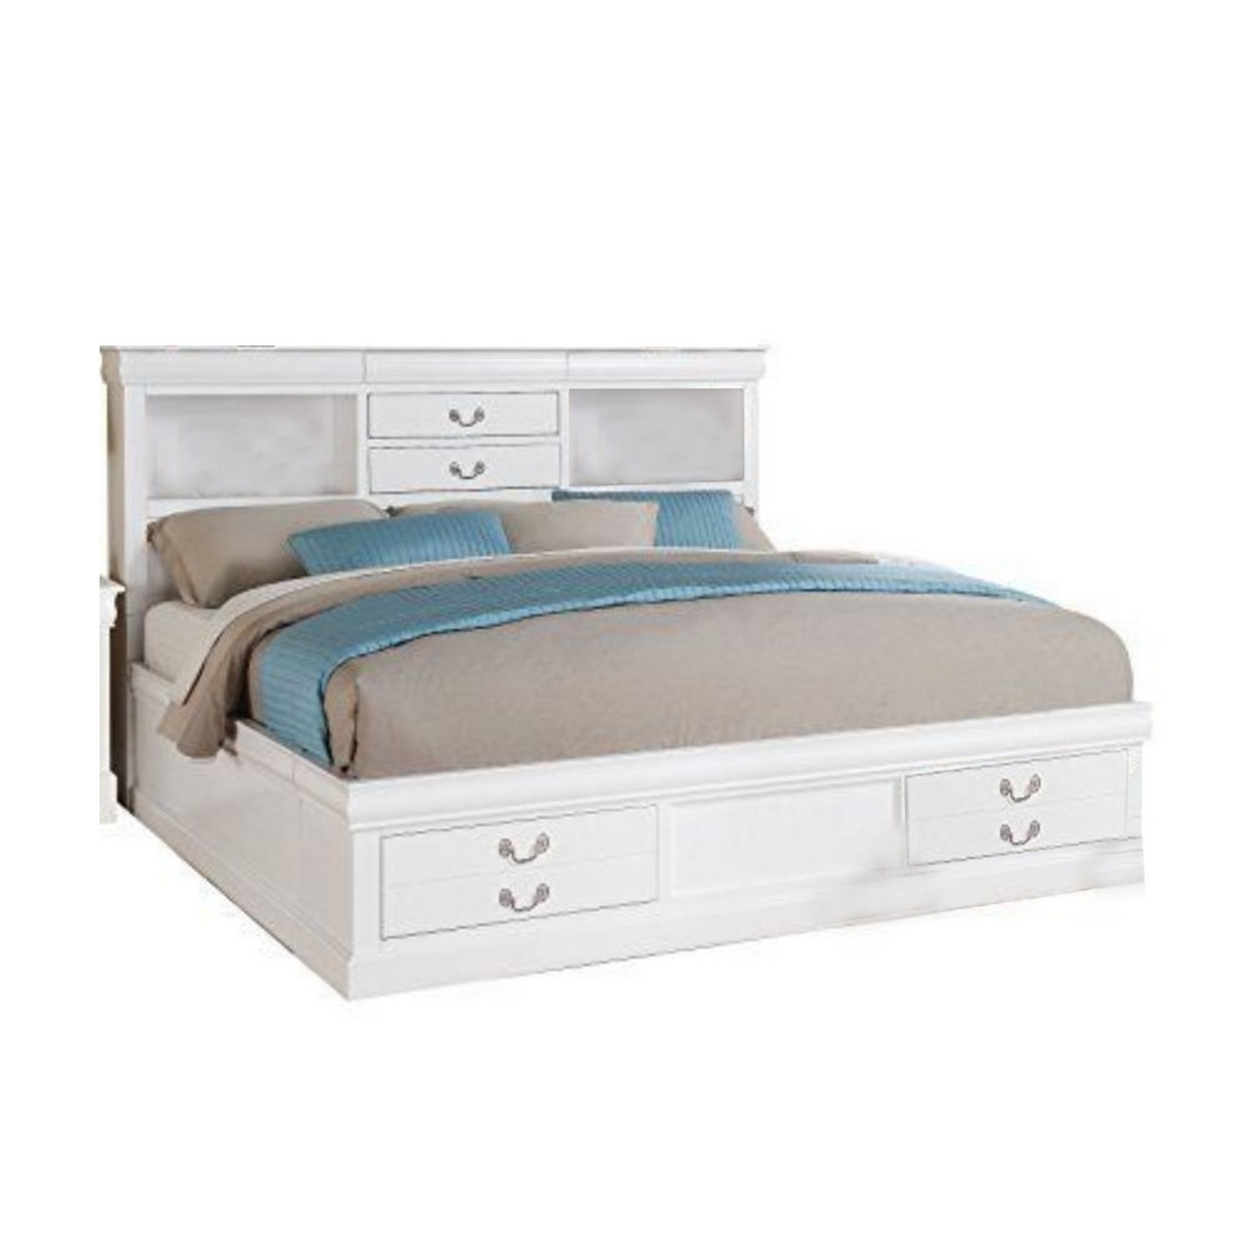 Luxurious And Stylish Queen Size Bed With Storage, White- Saltoro Sherpi